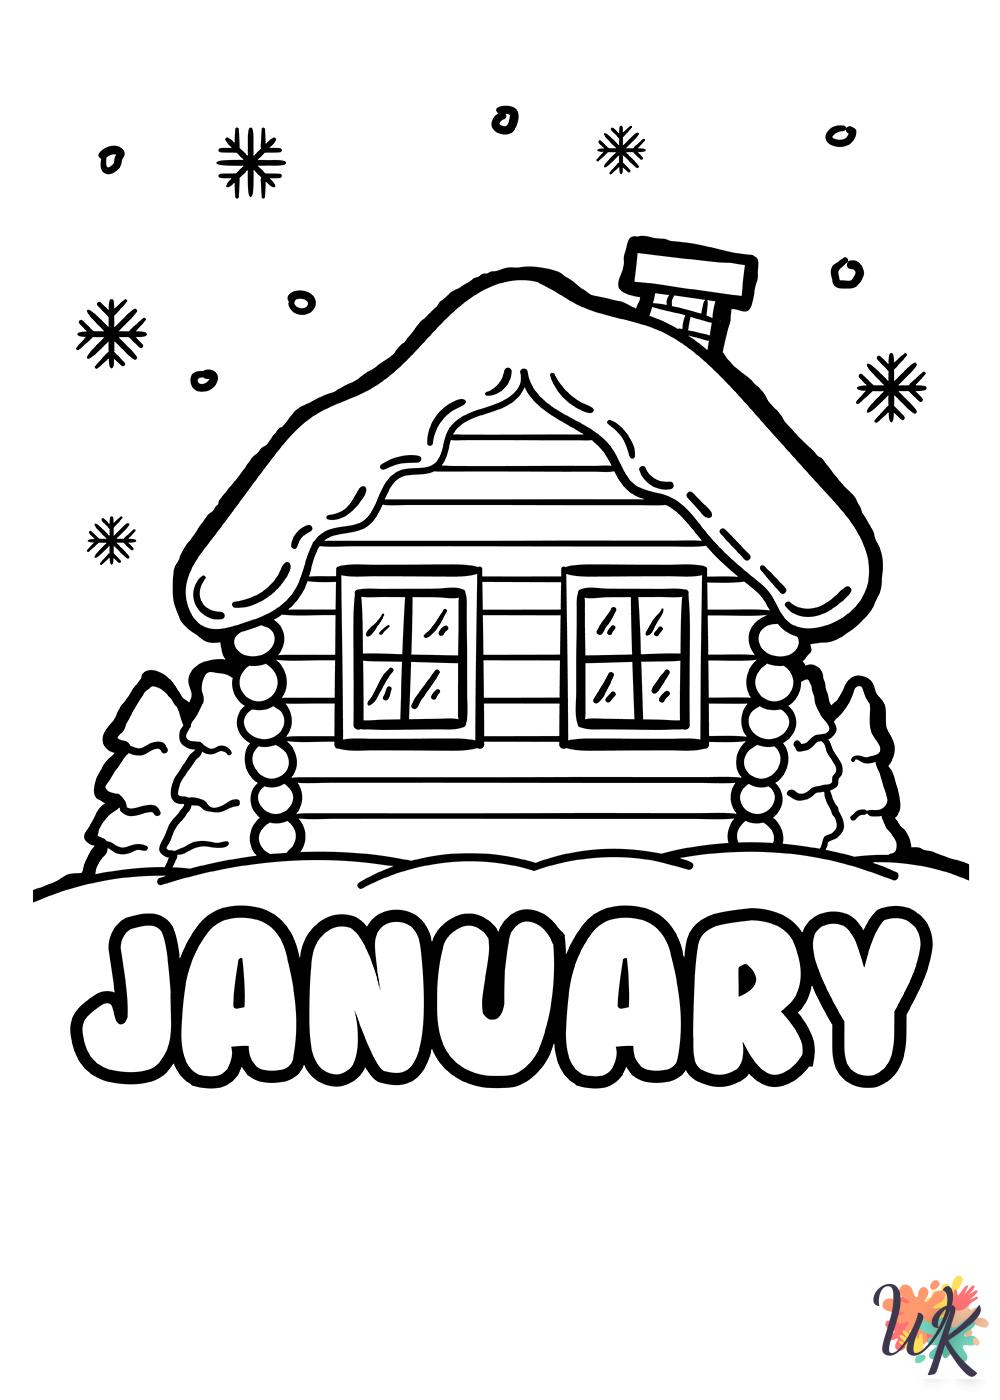 January decorations coloring pages